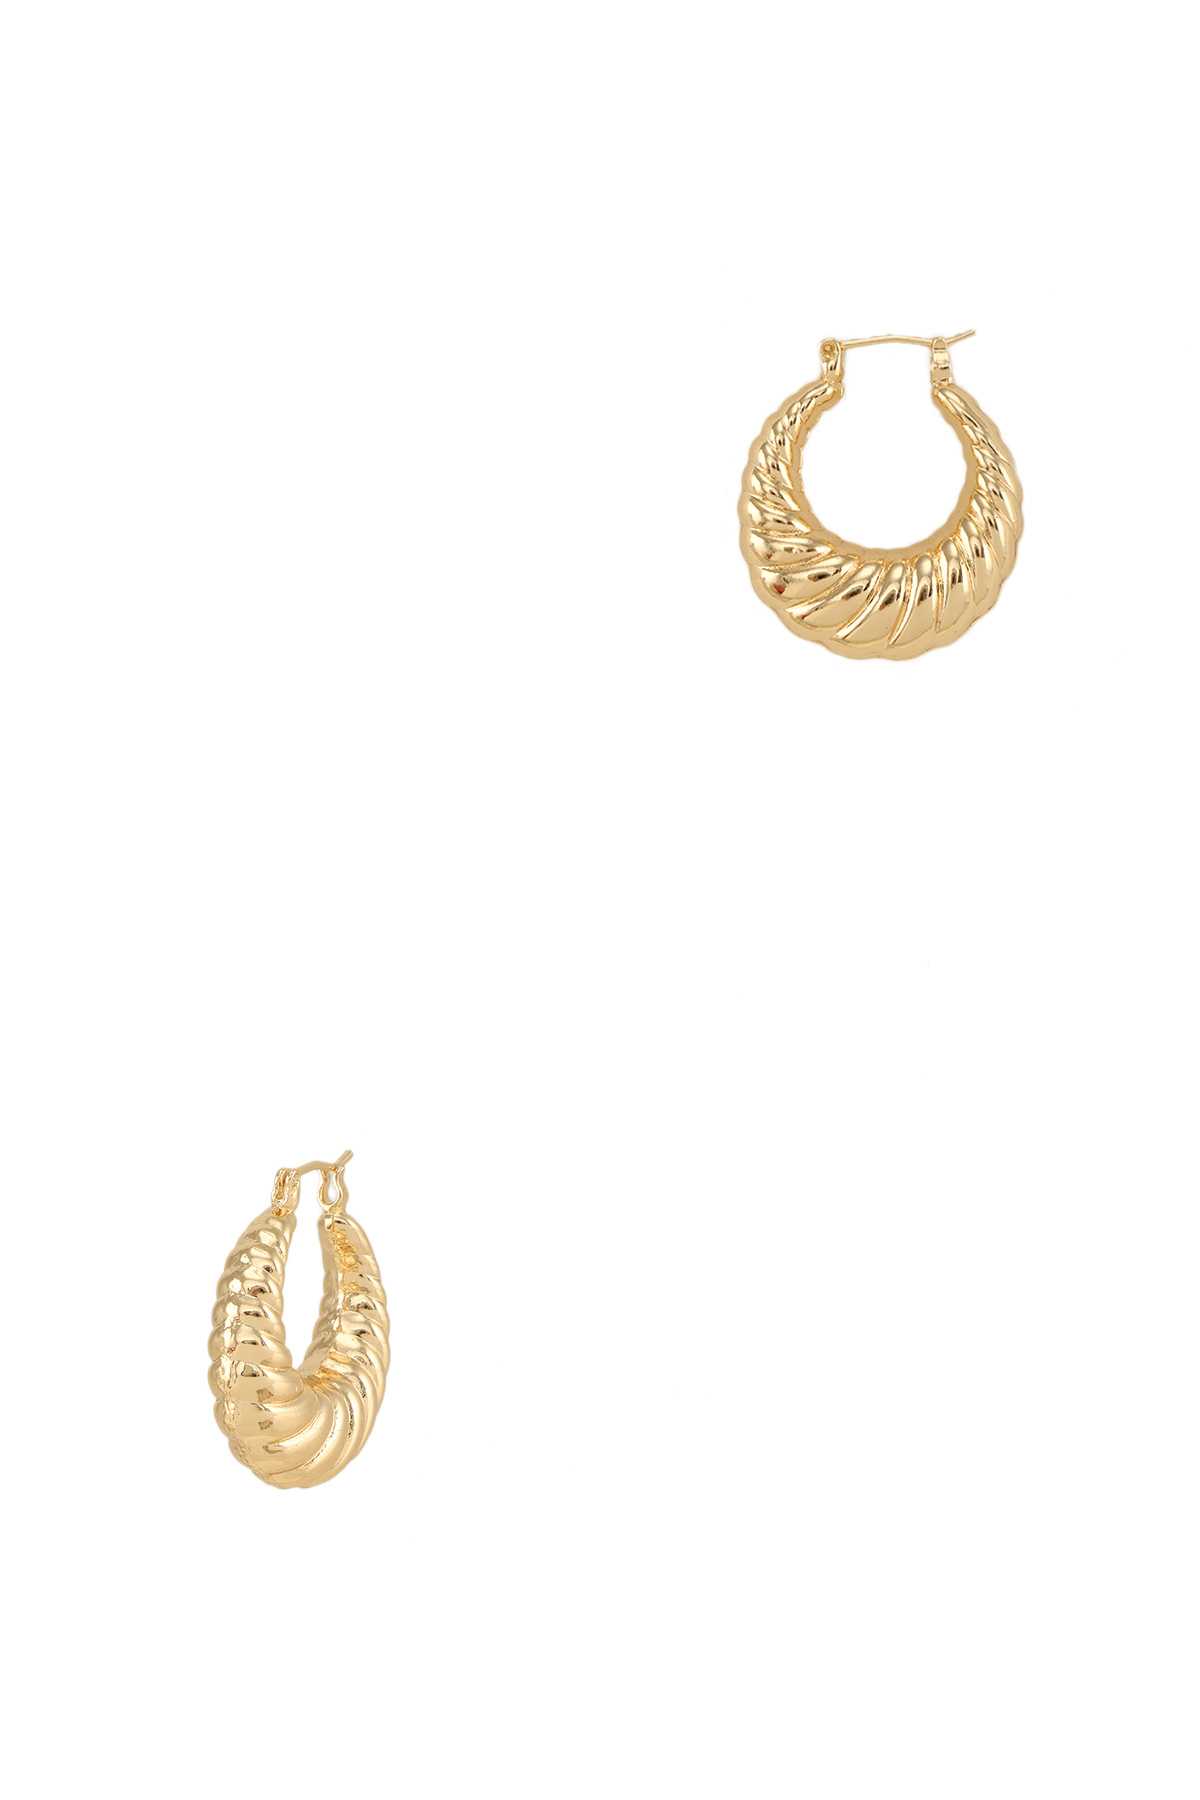 GOLD DIPPED Twisted Metal Earring